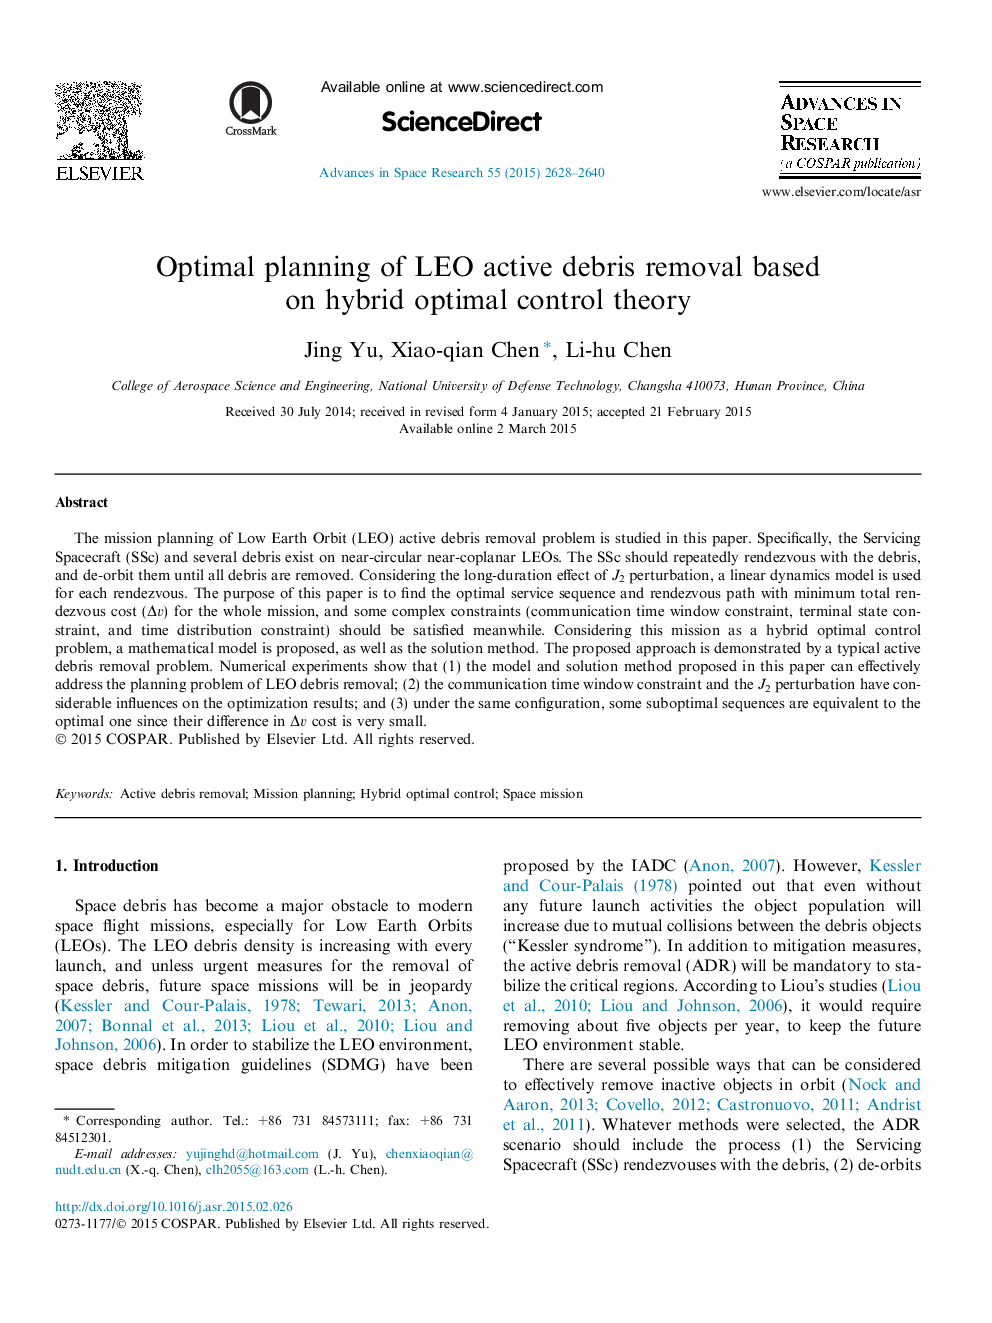 Optimal planning of LEO active debris removal based on hybrid optimal control theory